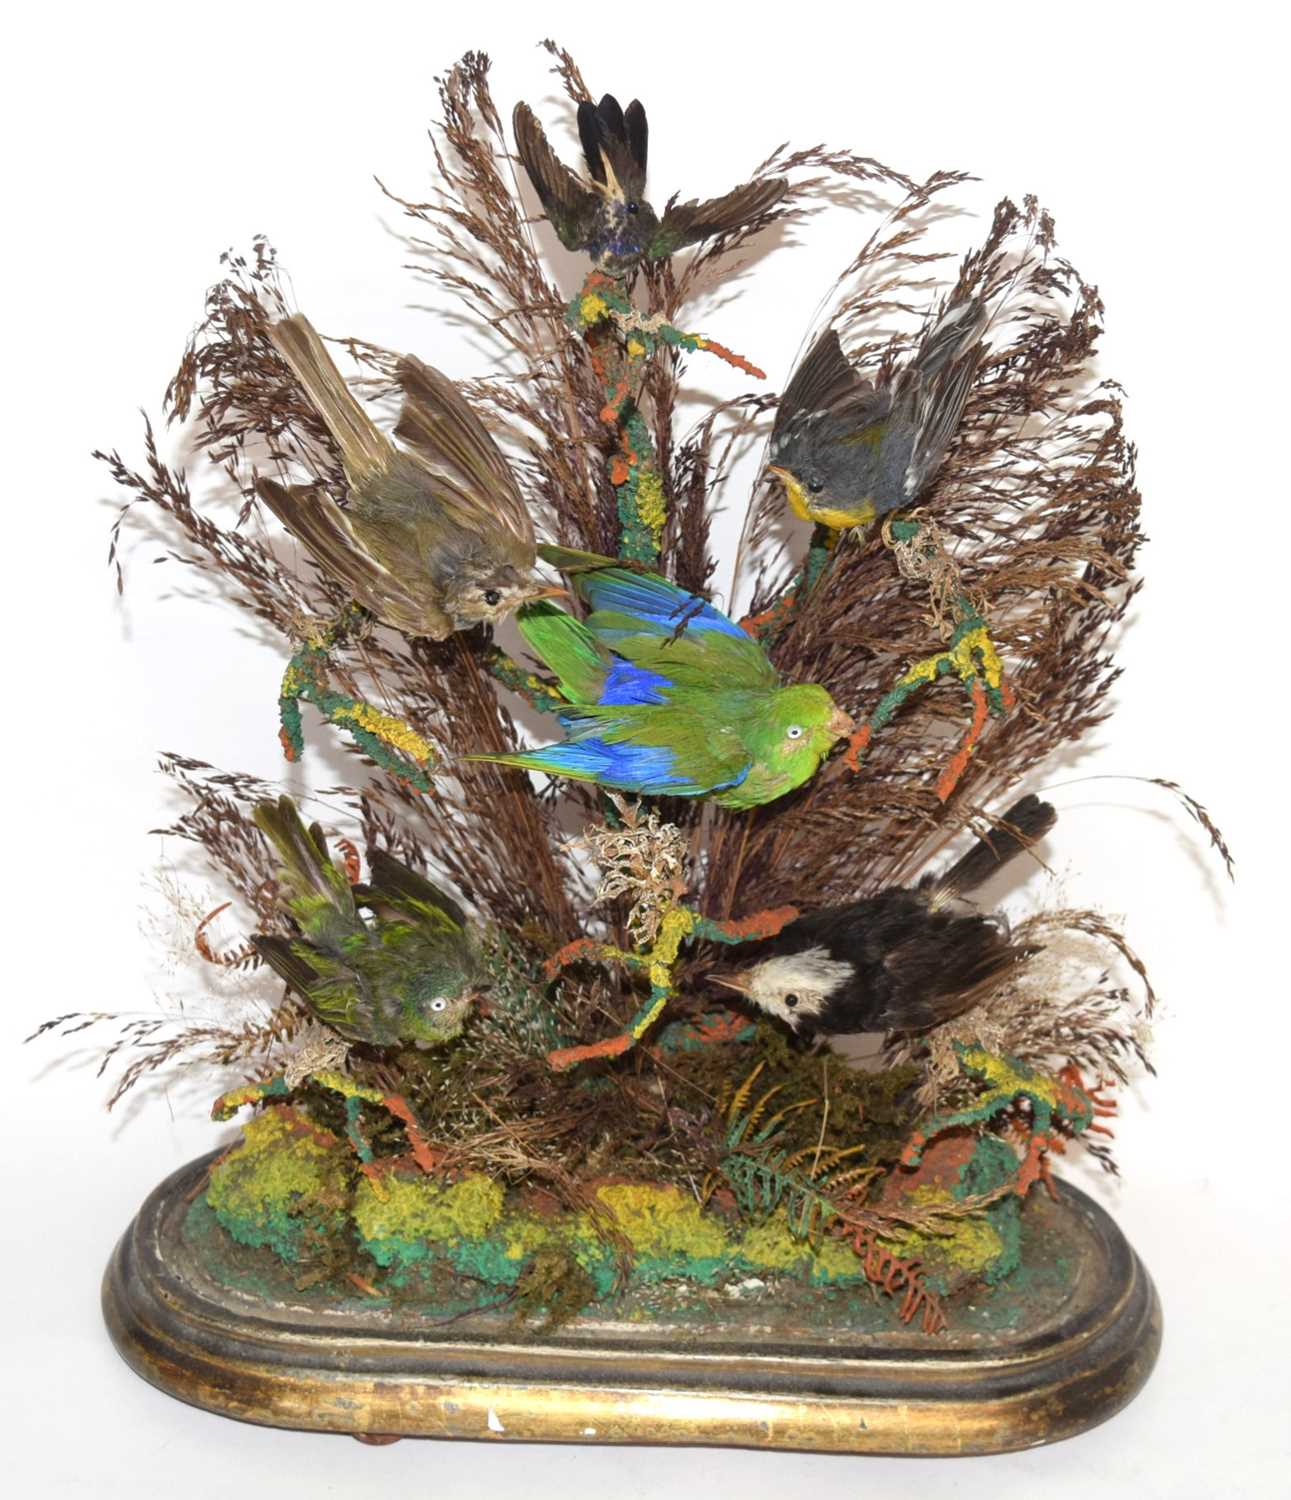 Victorian taxidermy diorama of 6 birds of paradise/ exotic birds set under glass dome in - Image 2 of 5